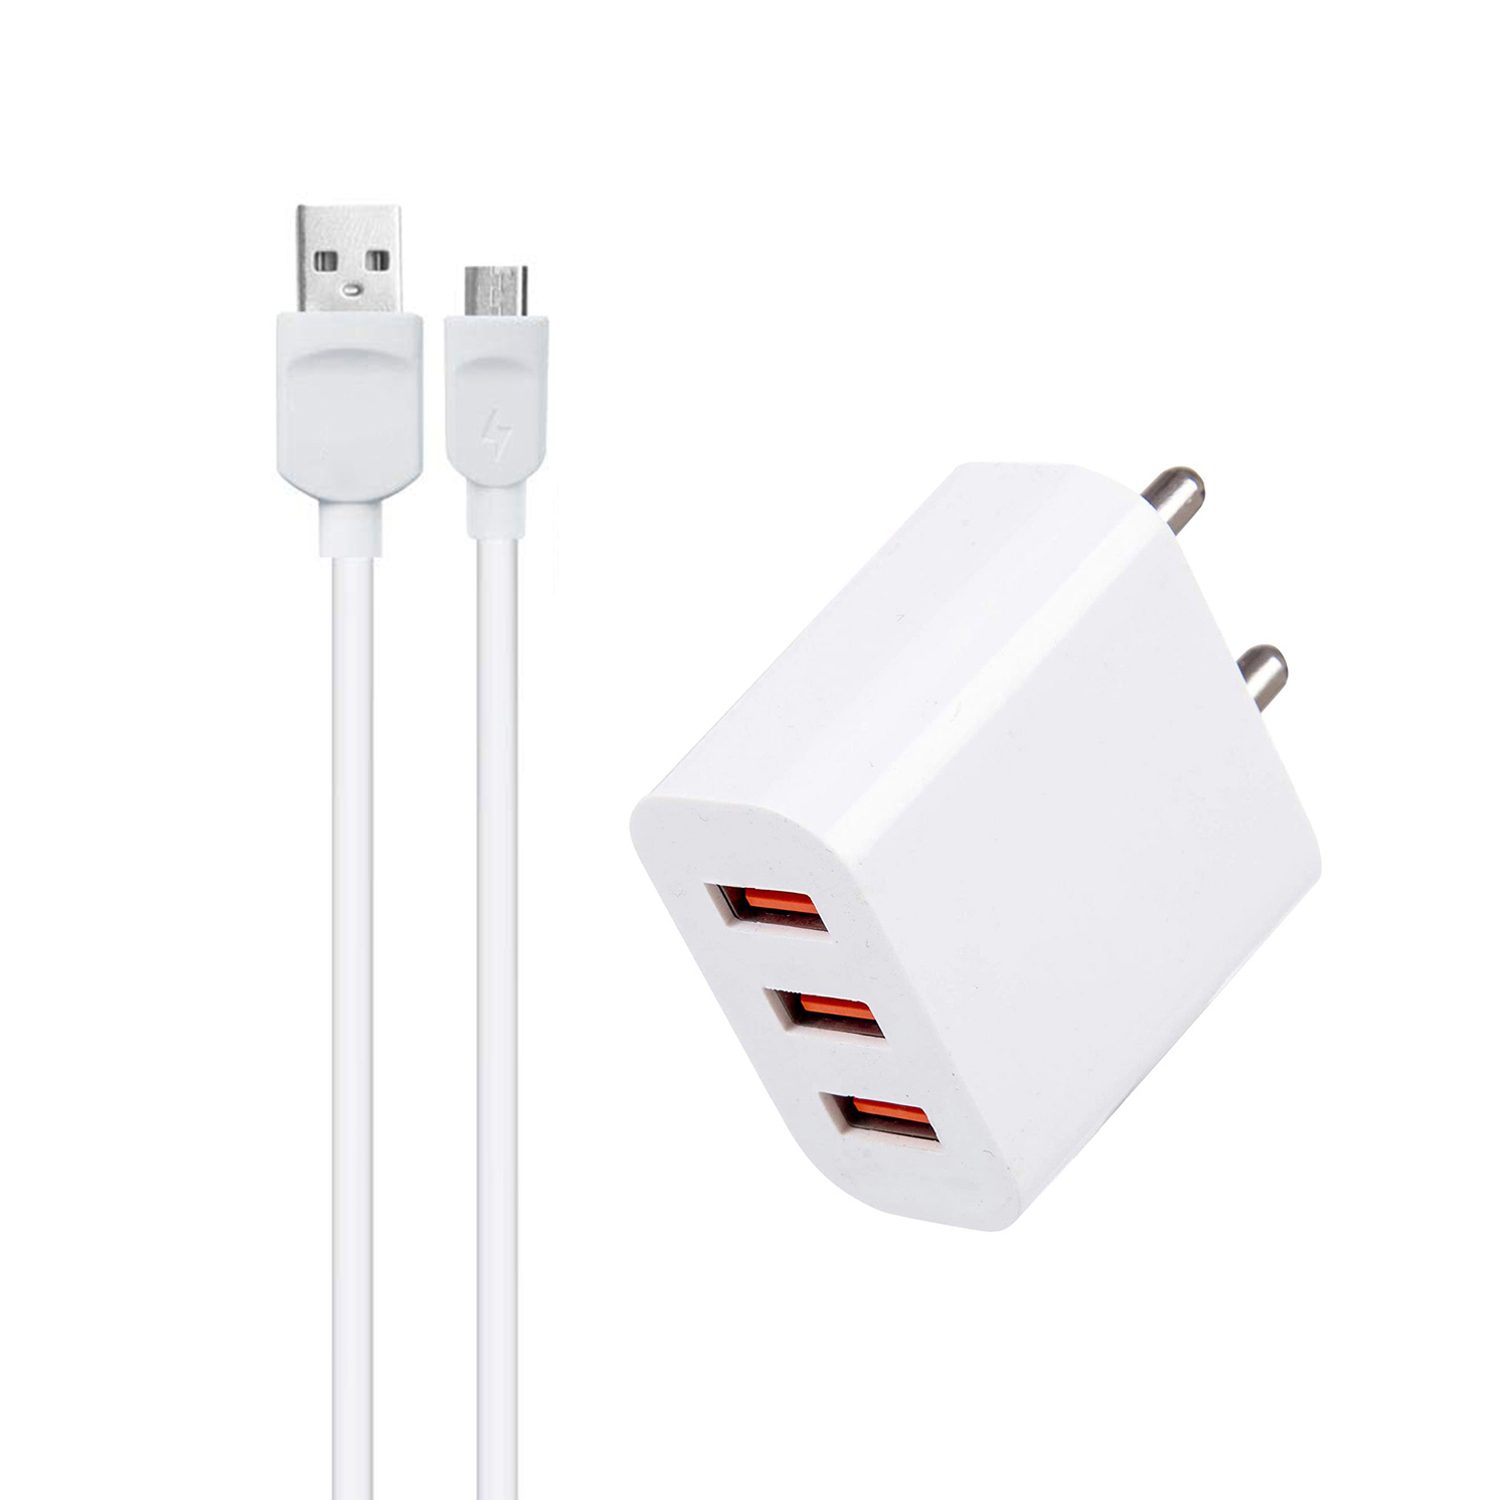 Digimate Dual USB 2.4 A Adapter With Micro USB Cables, Data Sync and Charging Cables